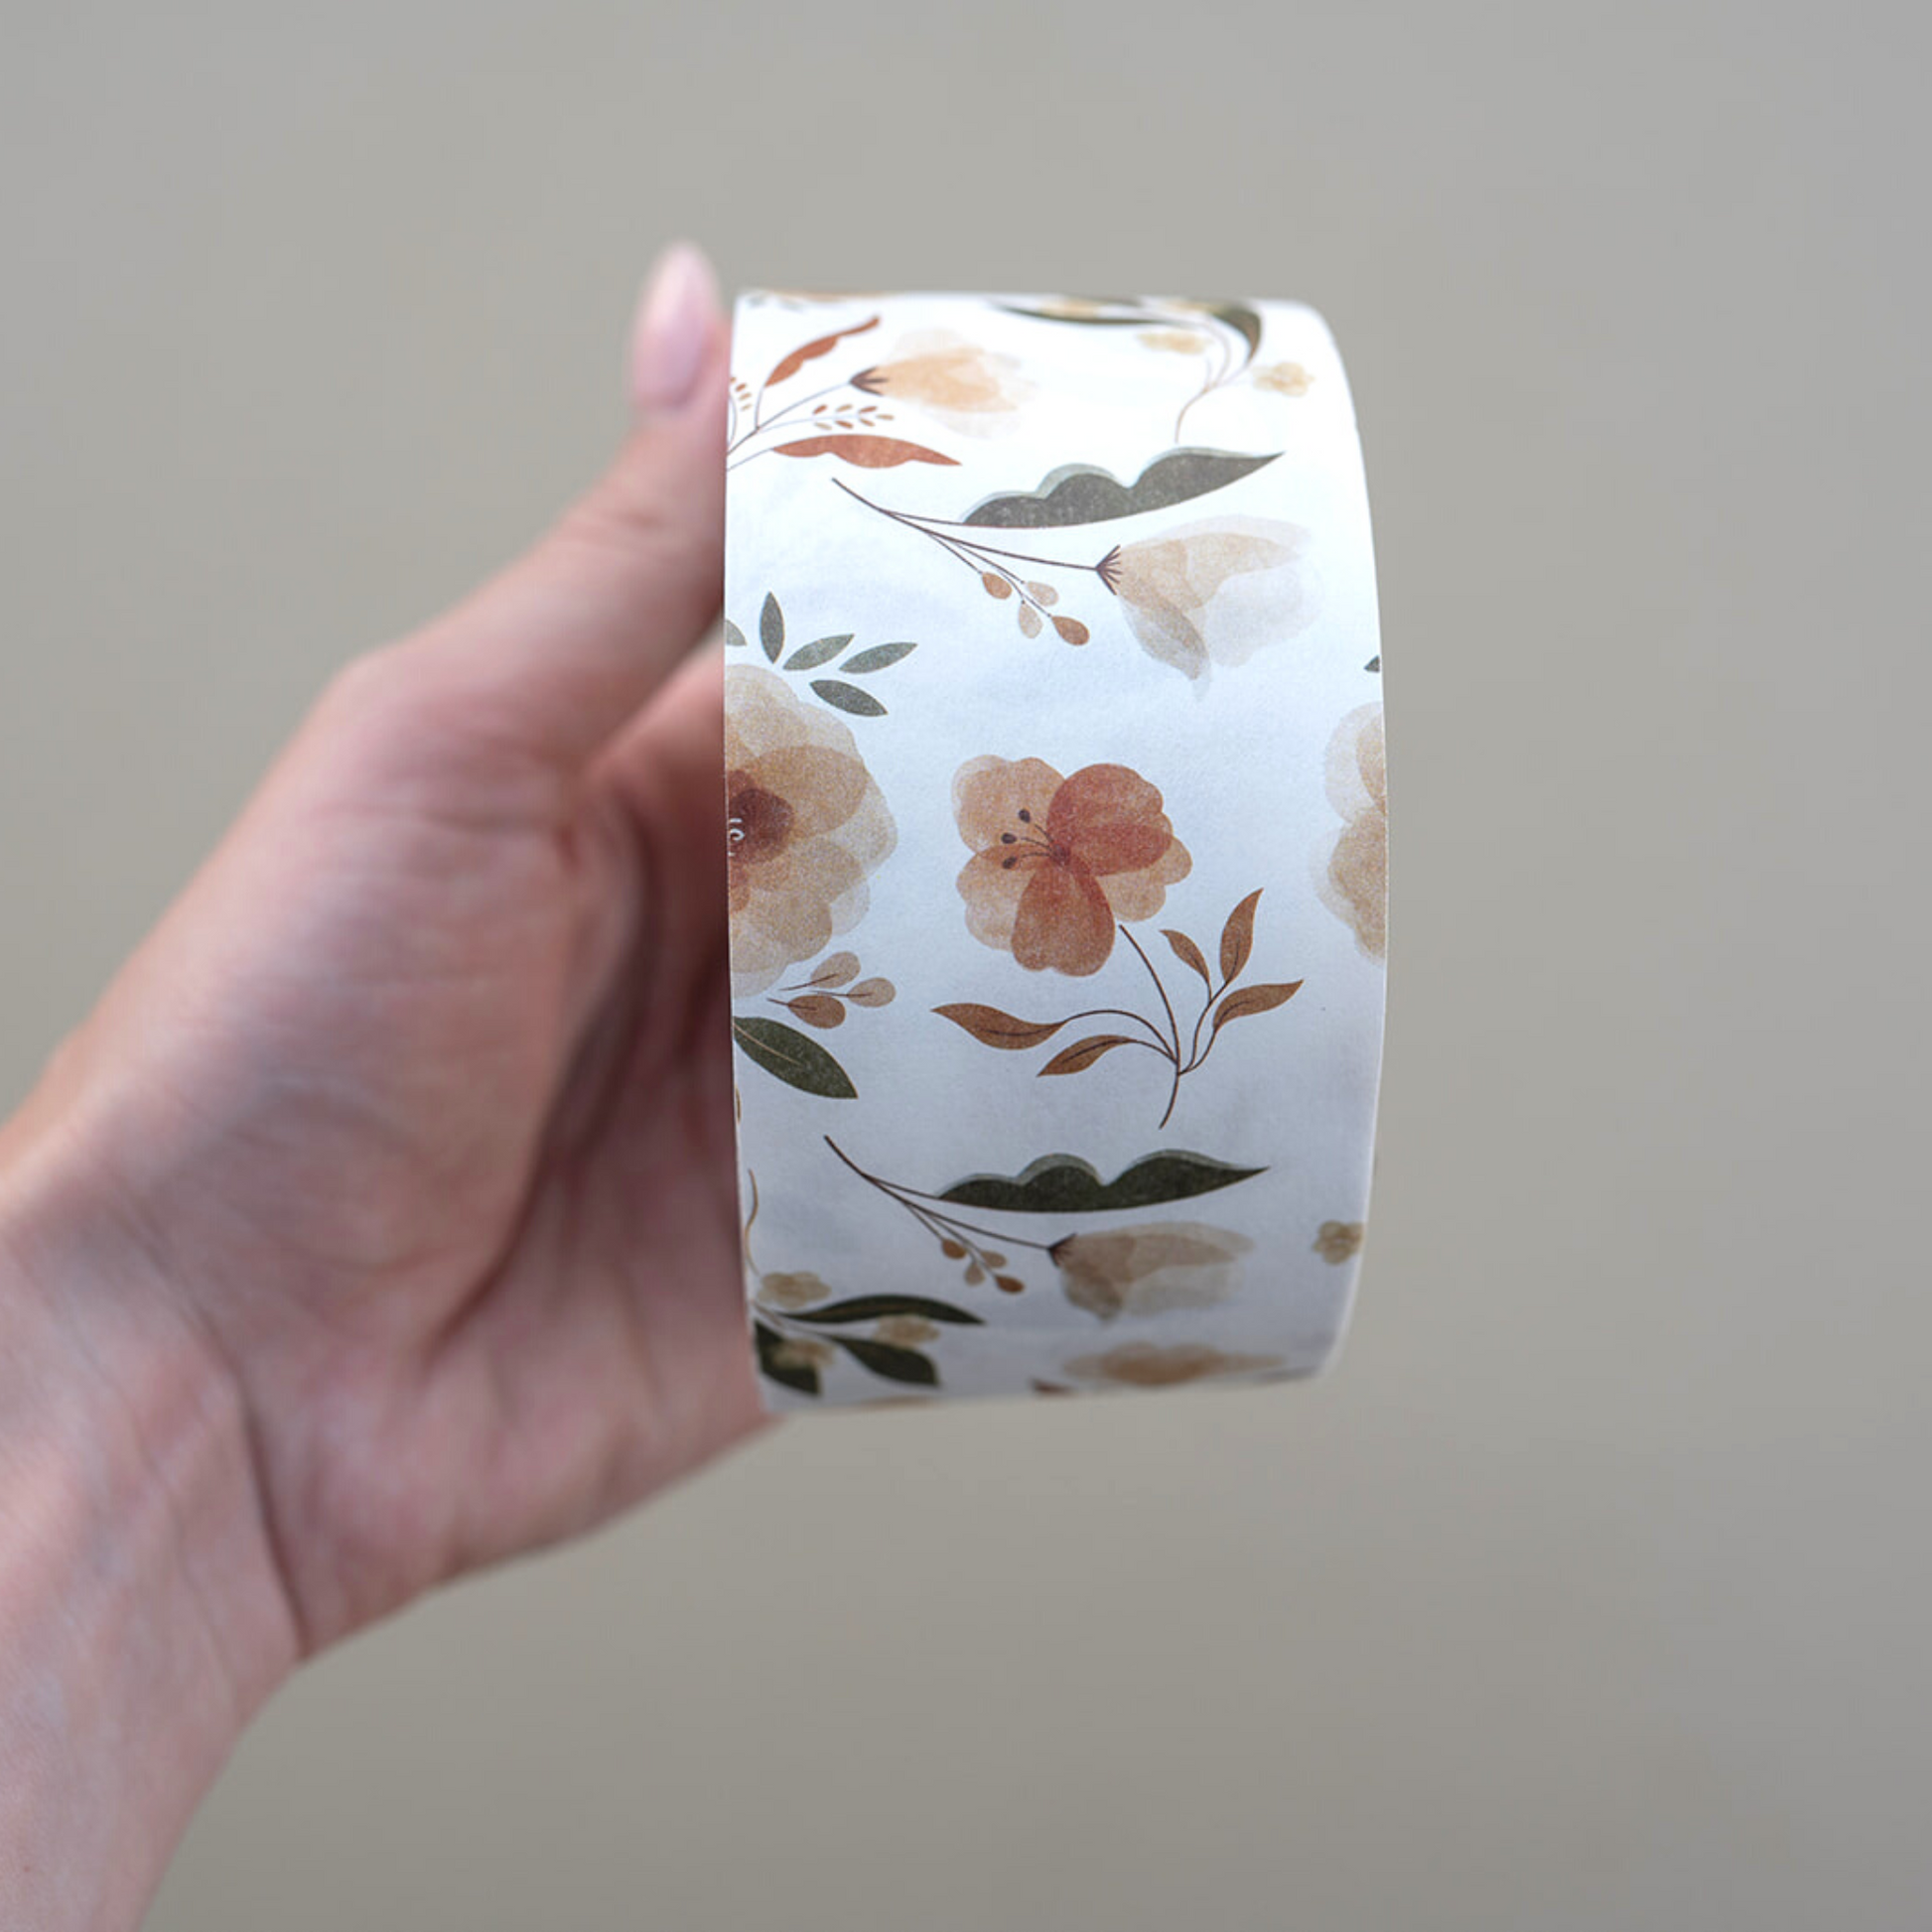 A hand holding a roll of Packing Tape - Camelia Bloom by impack.co.